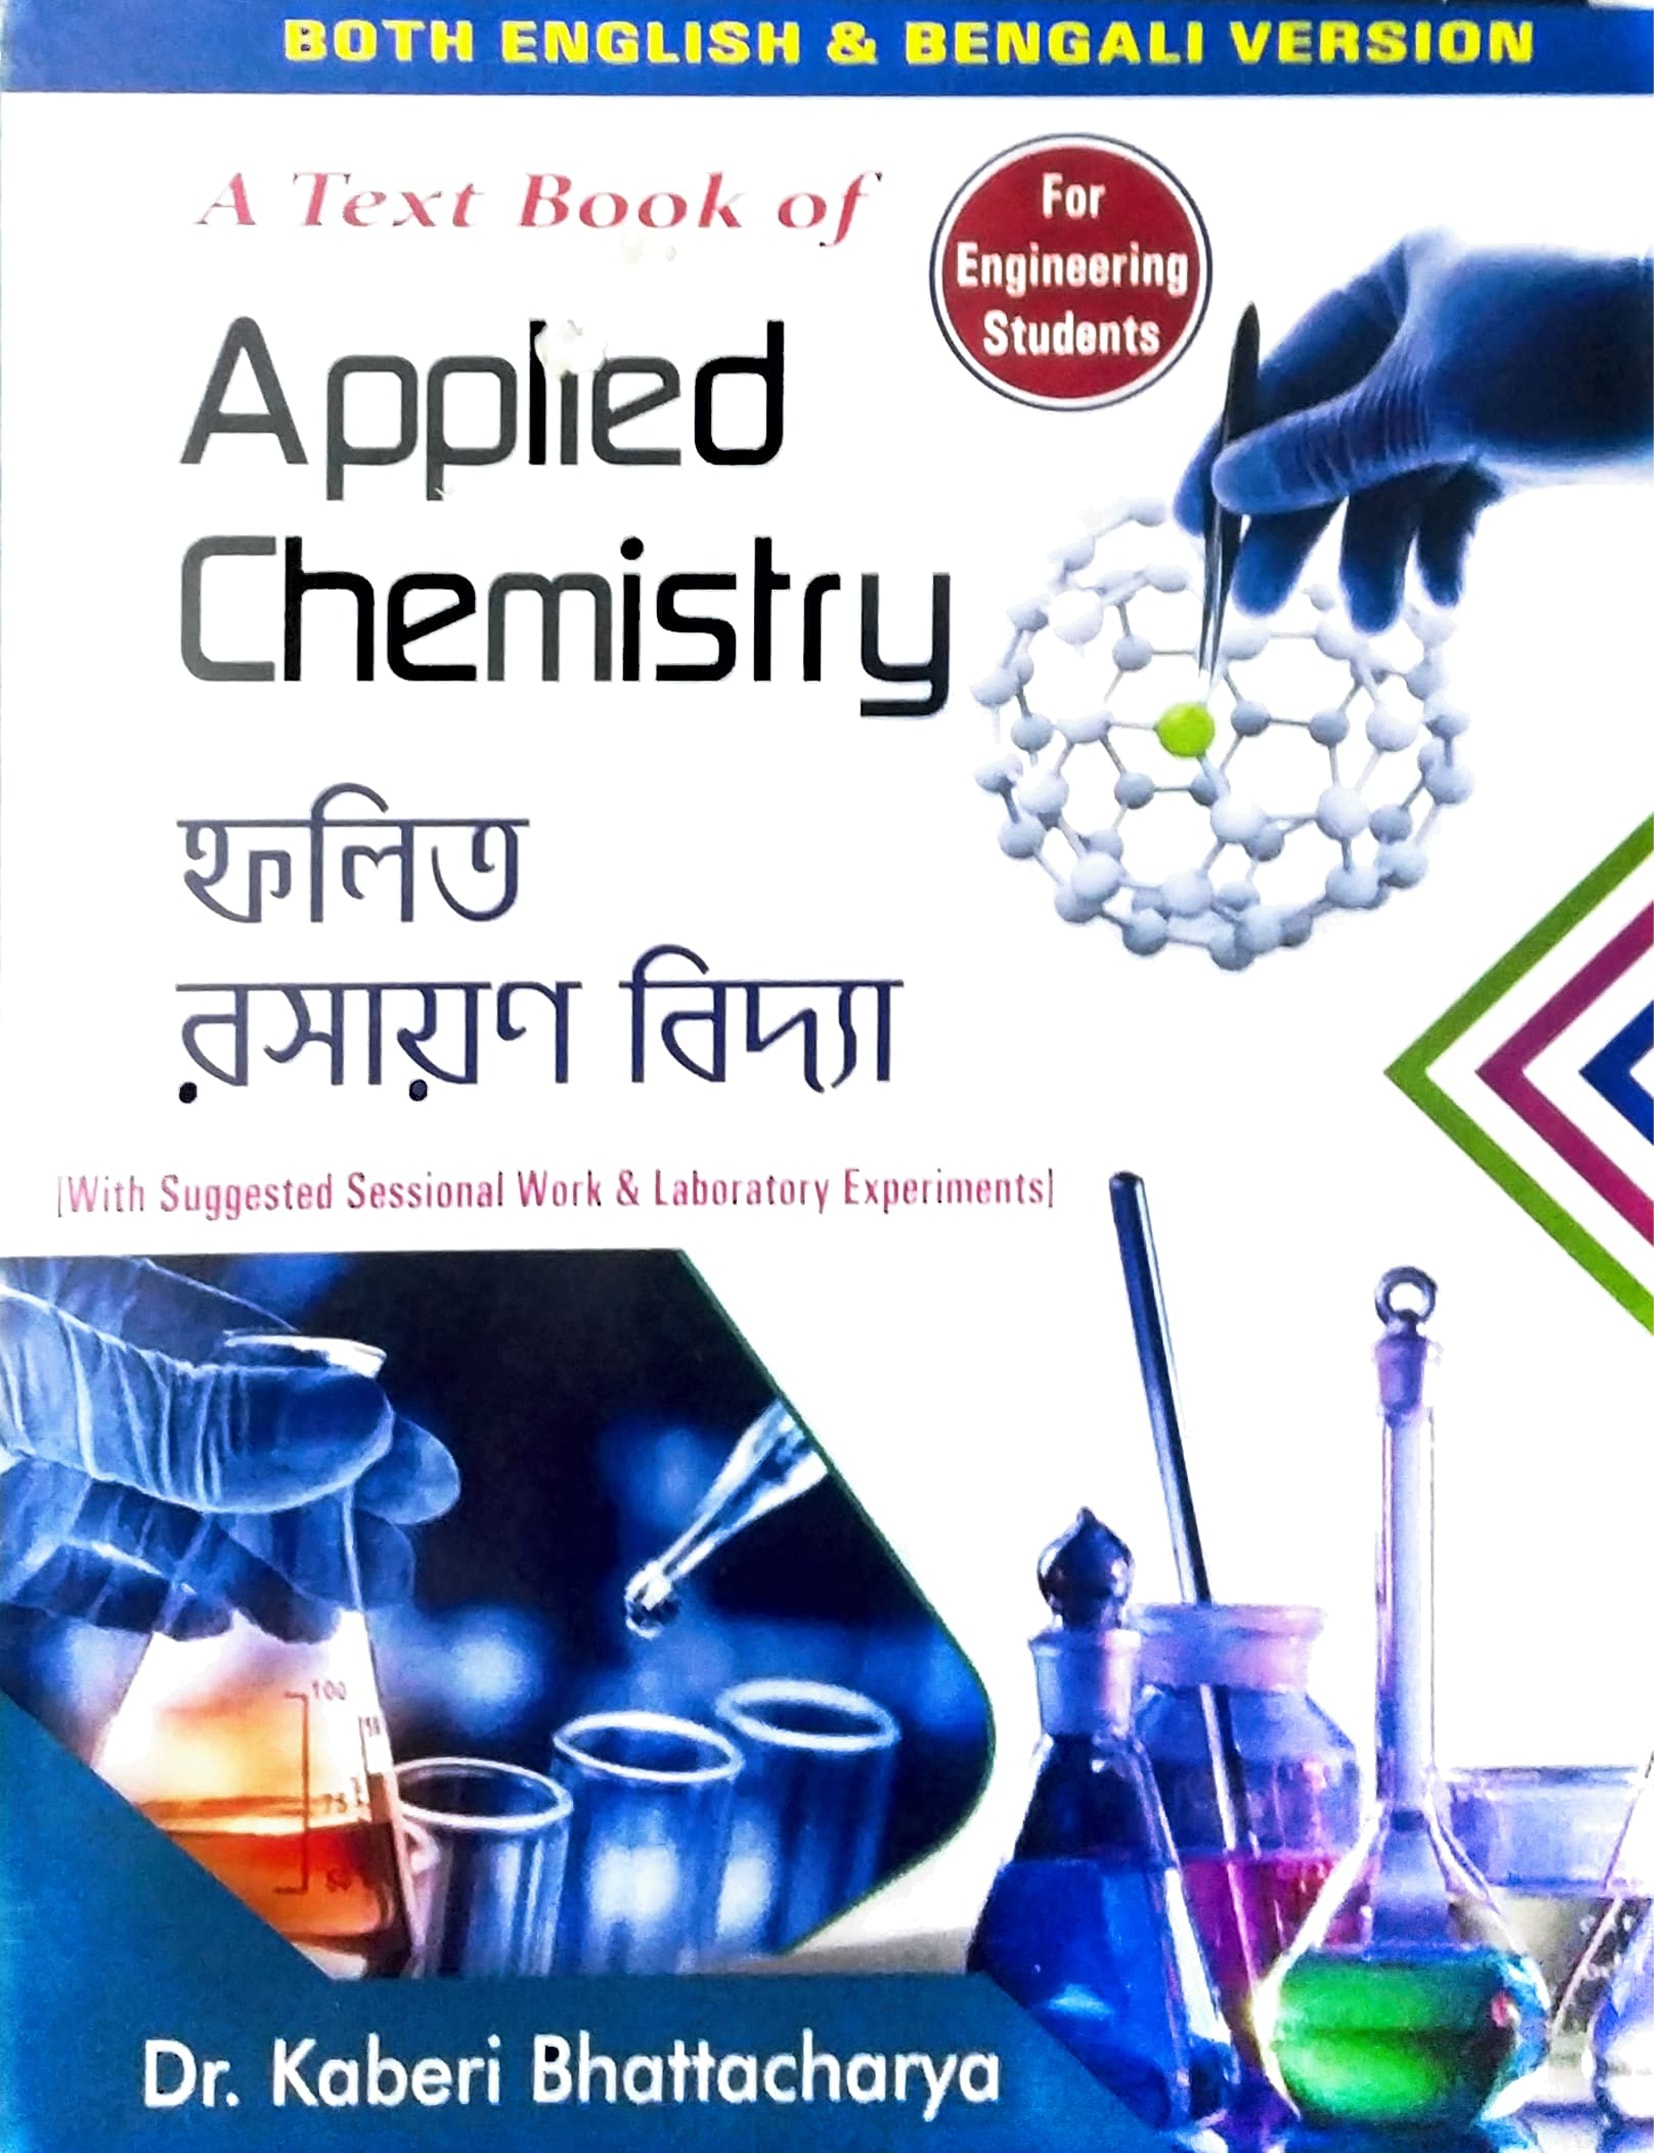 A text book of applied chemistry (Dr. kaberi Bhattacharya) 2023